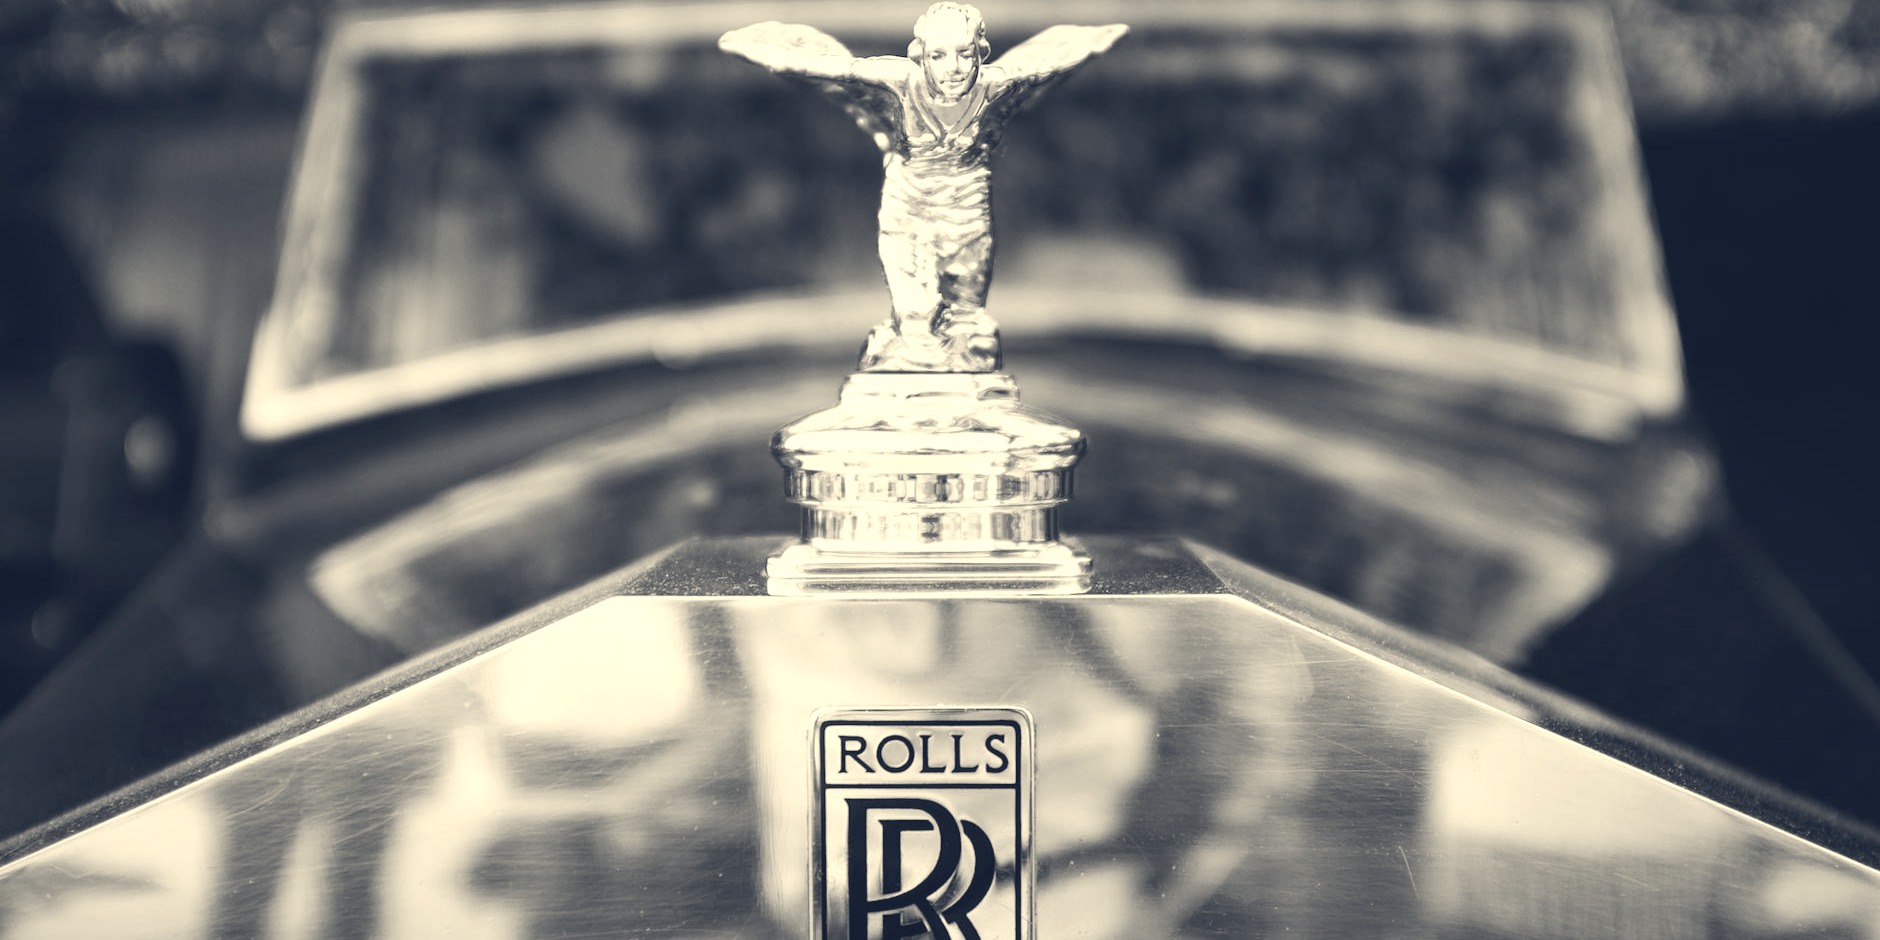 A Guide to the Bespoke Features of the Rolls Royce Ghost for Discerning Surrey Motorists